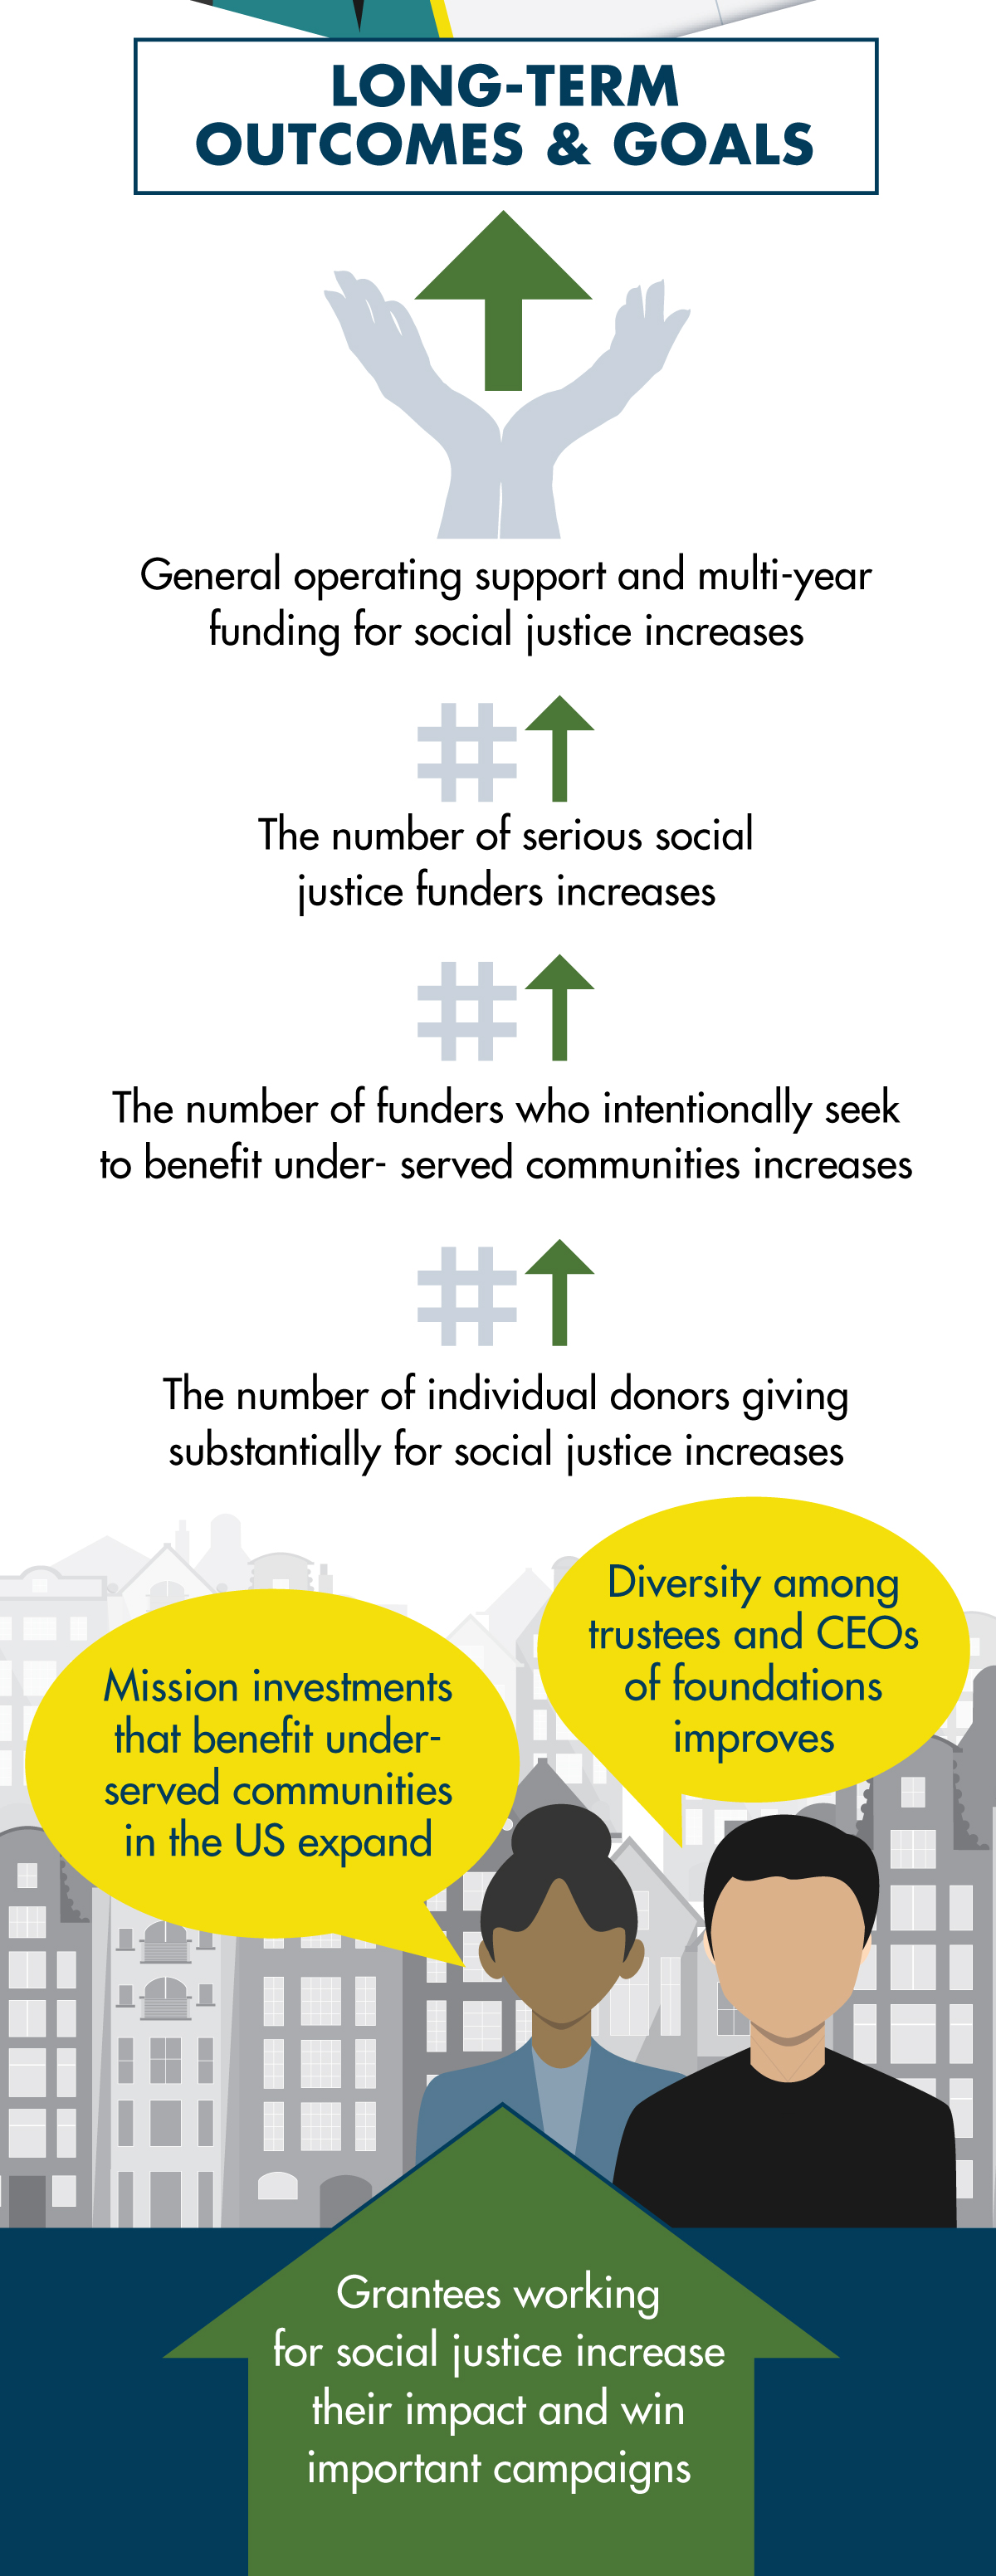 In the end, we want to grantees working for social justice to increase their impact and win important campaigns.